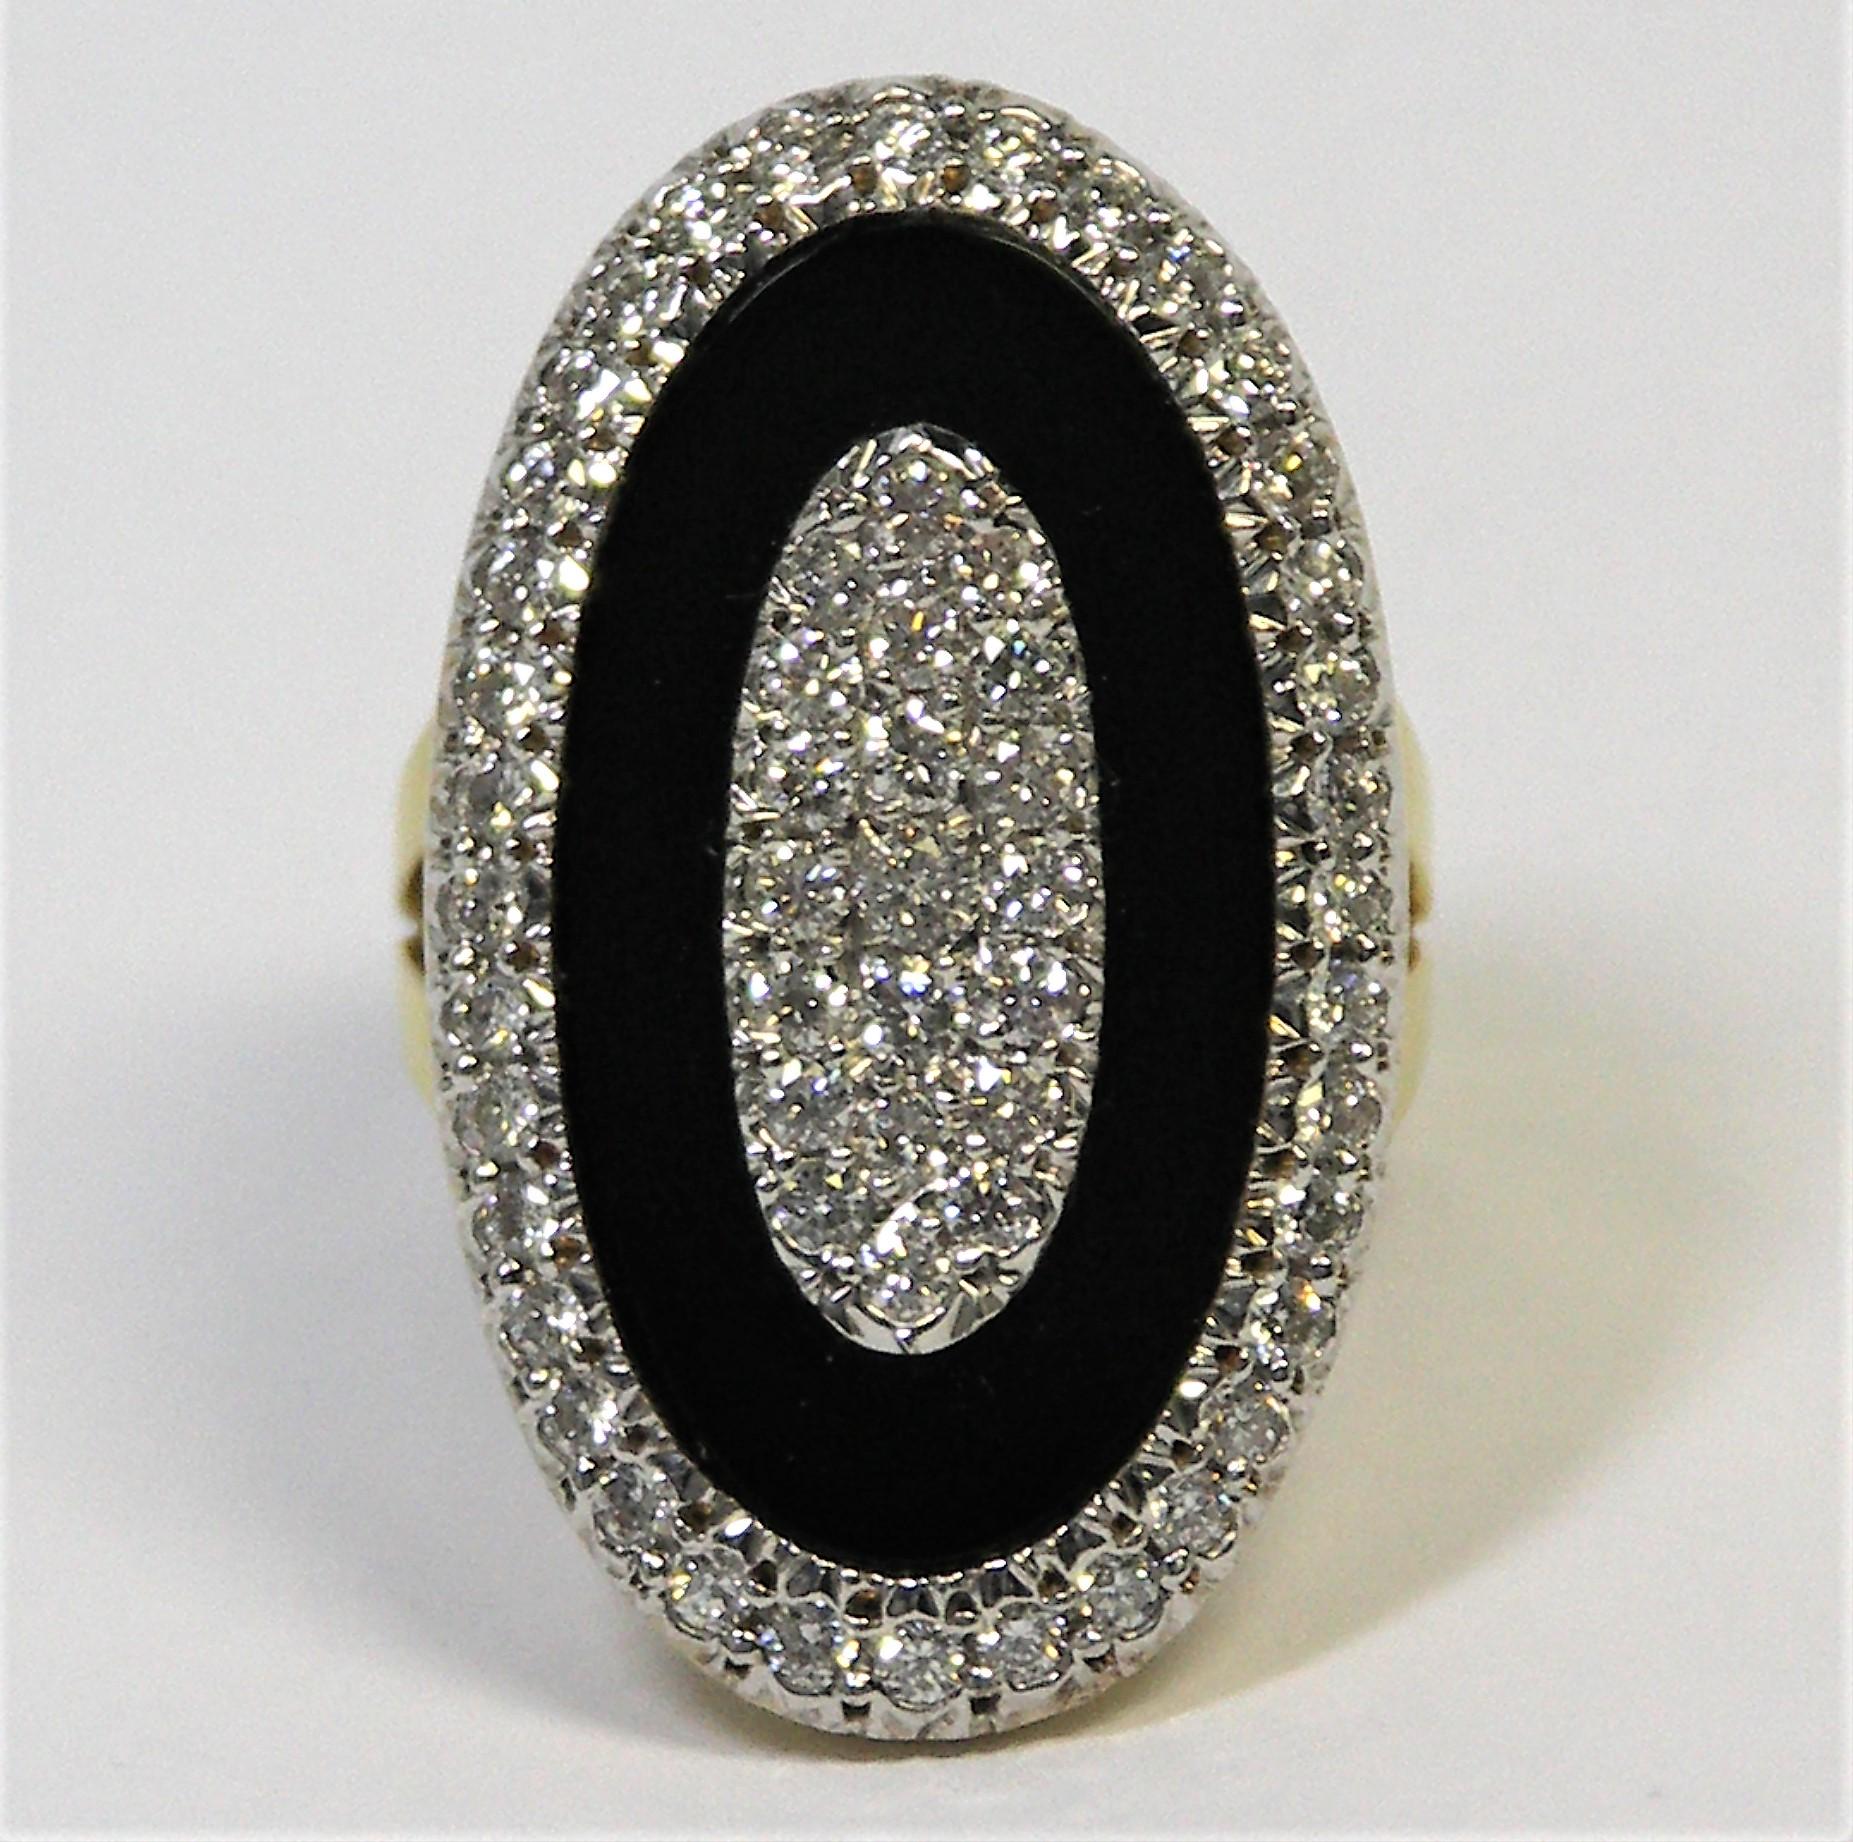 Made of 18K Yellow Gold with a large oval shaped, onyx slab cut into
the ring, surrounded by pave set diamonds weighing an approximate
total of 1.70CT of overall G Color and VS1 Clarity. Notice the detailed
design sides of the ring. Measures 1 3/8